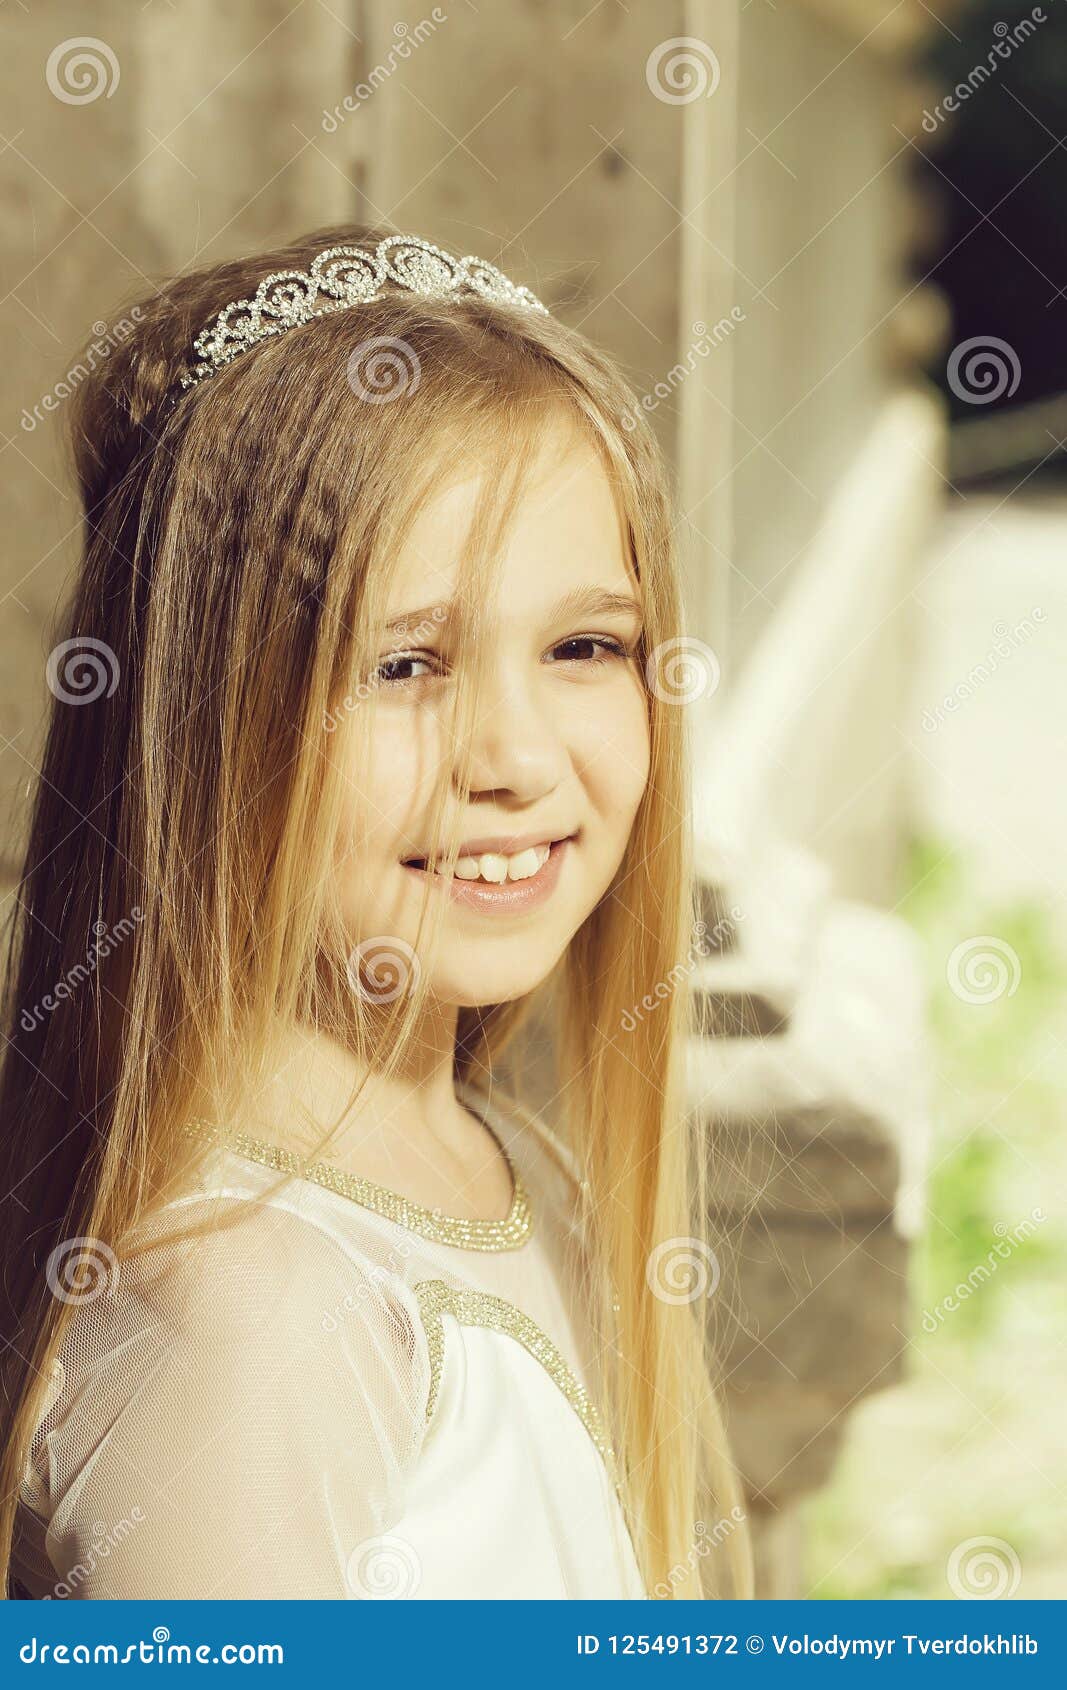 Small Girl In Princess Crown Stock Photo Image Of Wedding Face